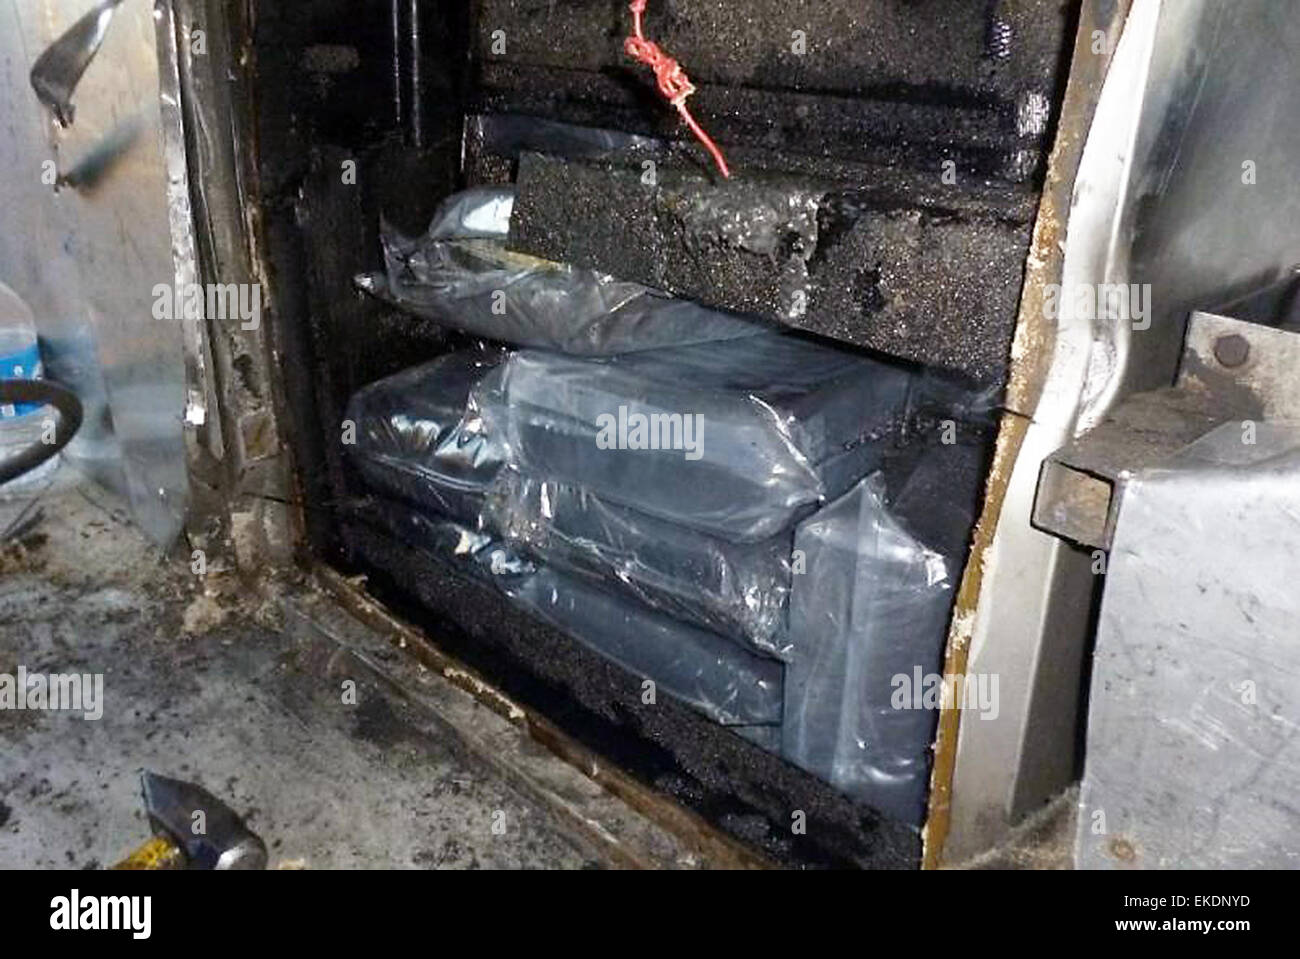 020515: Calexico, Calif. — U.S. Customs and Border Protection officers at the Calexico East port of entry arrested the driver of a commercial touring bus after discovering more than 391 pounds of marijuana concealed inside the vehicle’s fuel tank. Stock Photo